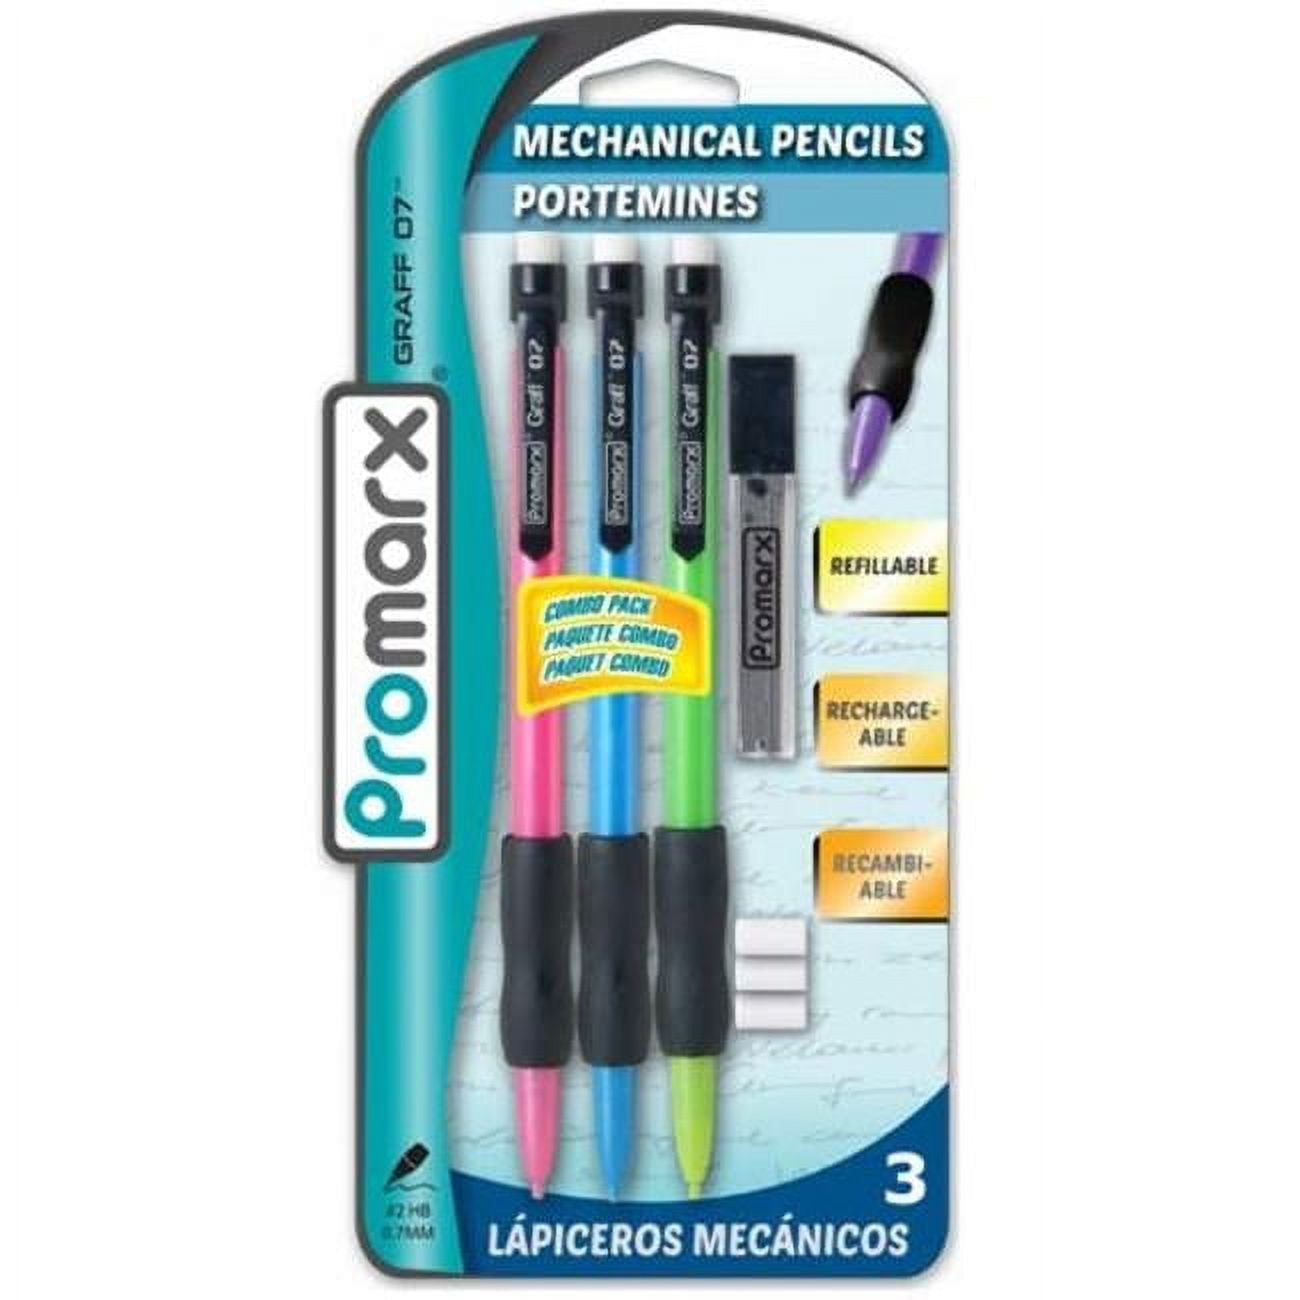 Picture of DDI 2329857 Promarx Mechanical Pencils - 3 Count  0.7mm Lead  Refillable  Assorted Barrel Colors  Extra Lead Included Case of 48